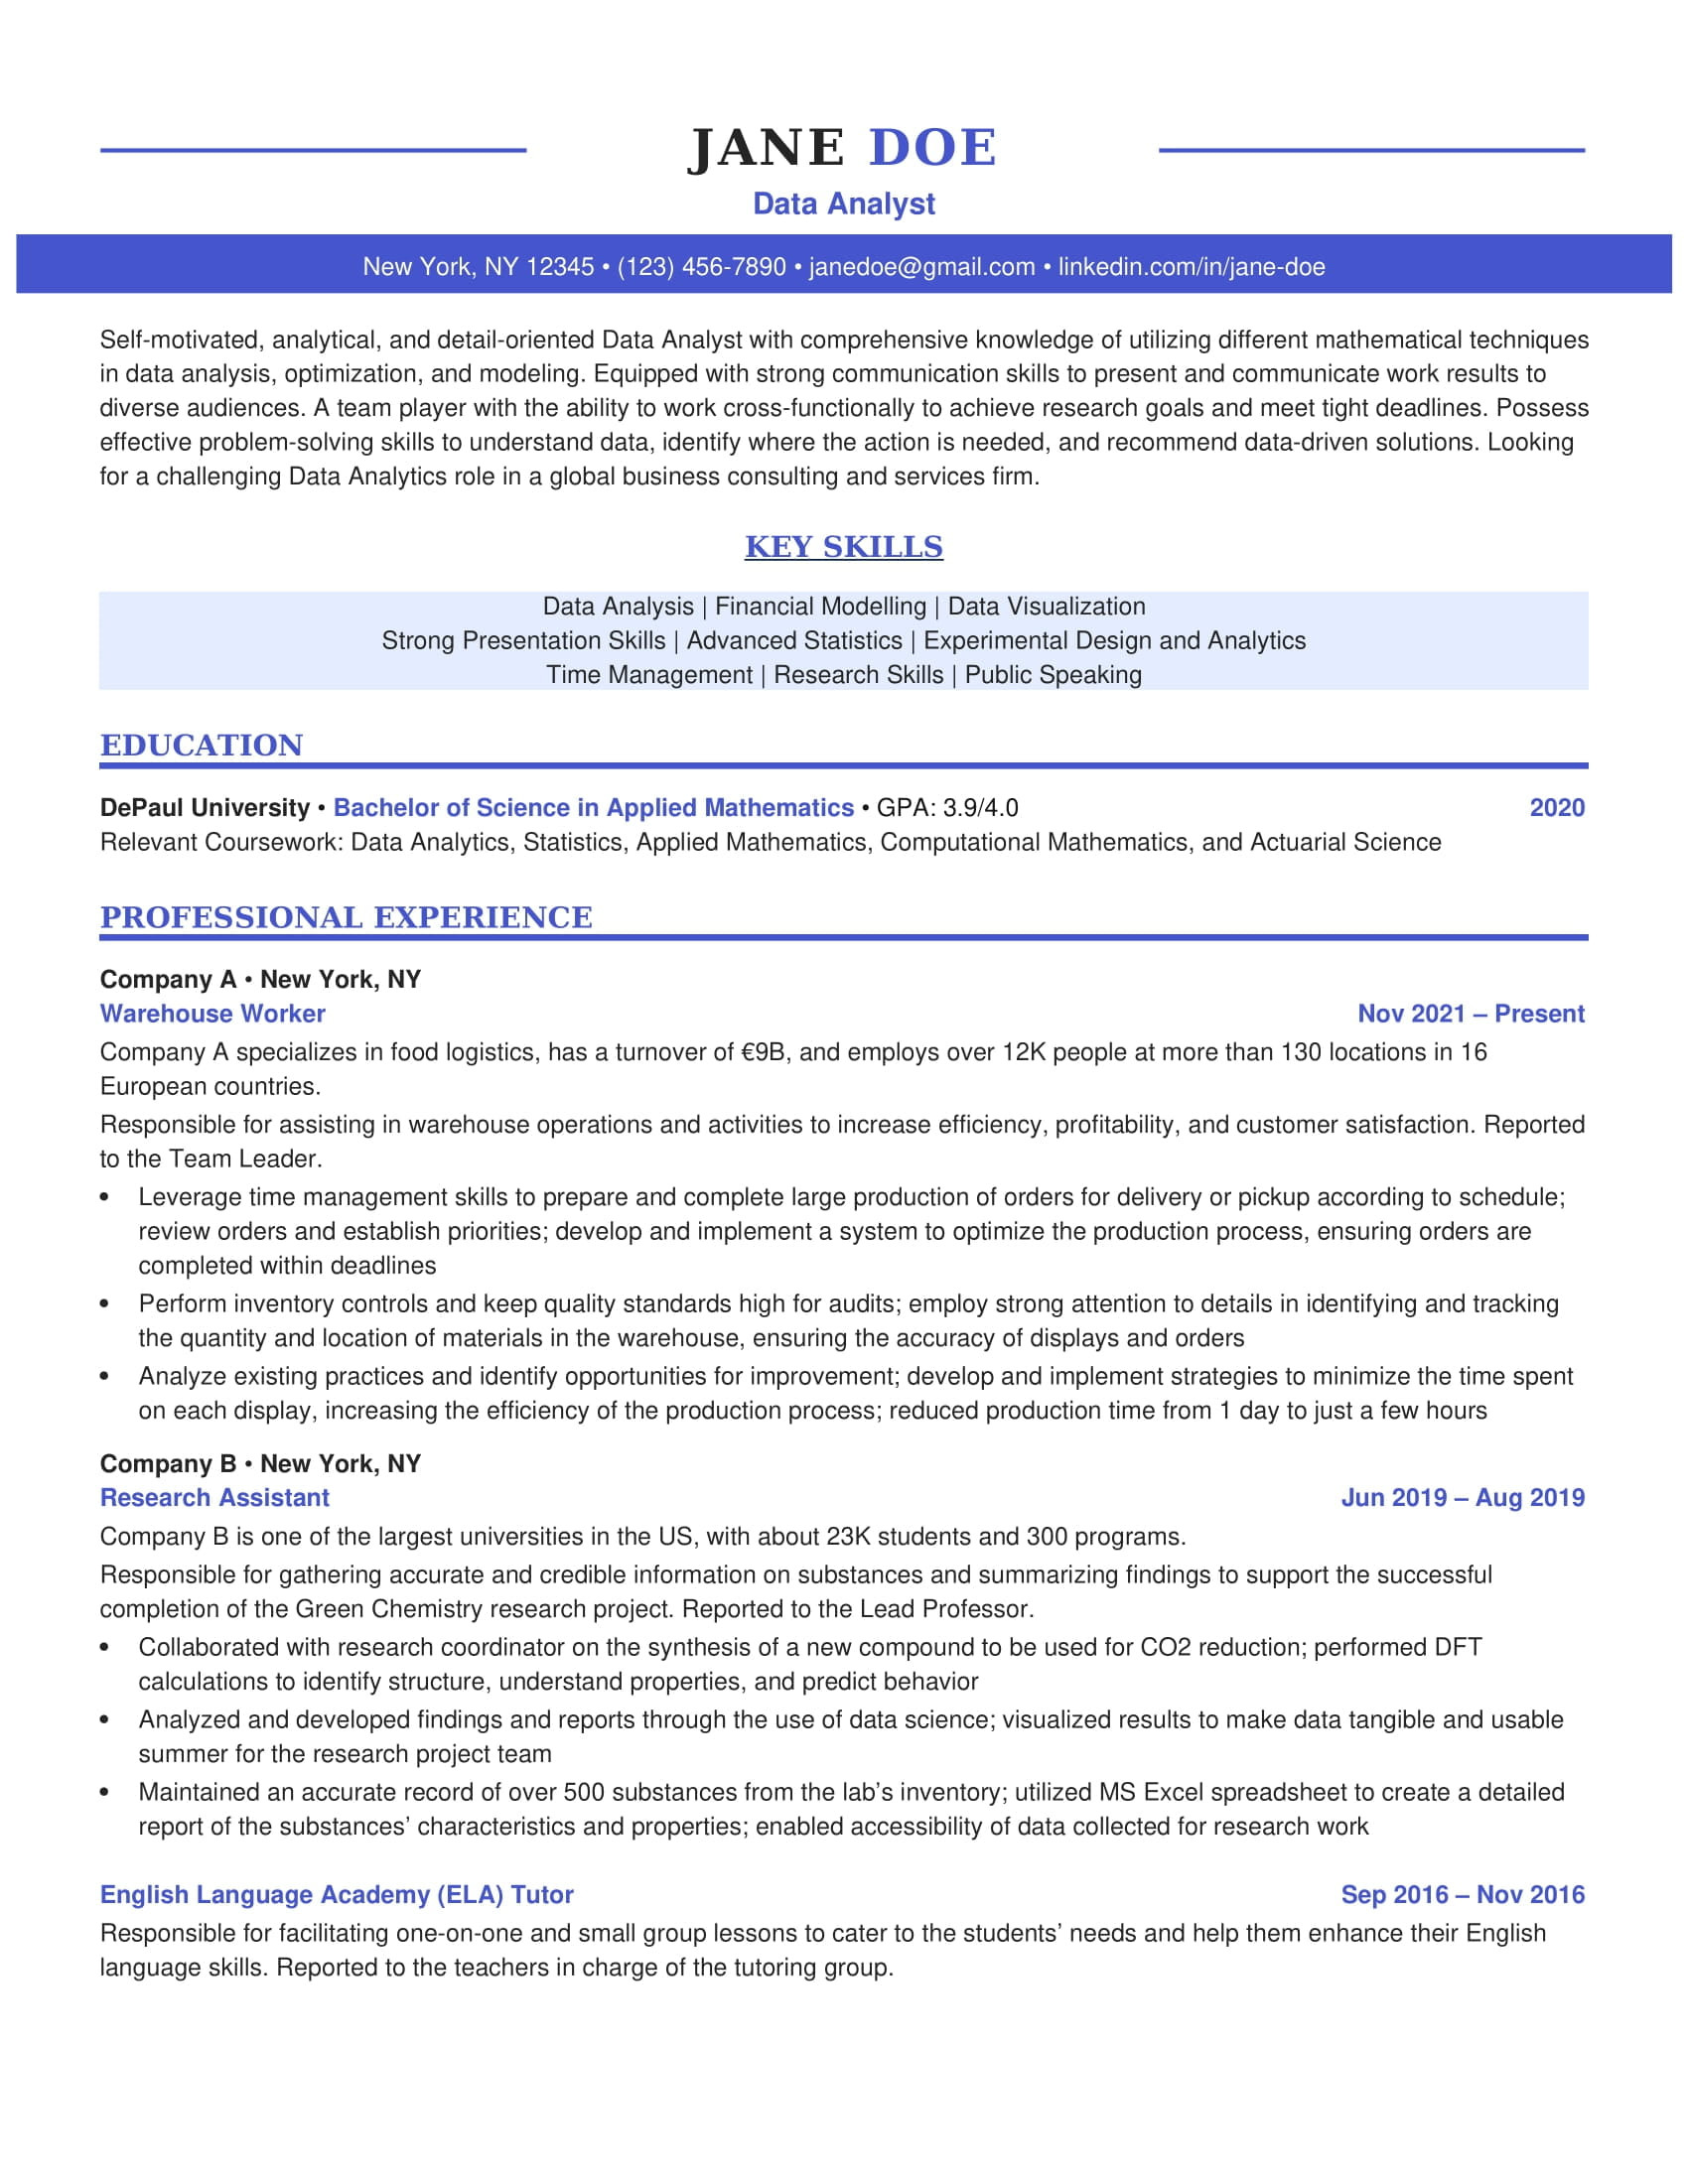 Samples Of Education Resumes Depaul Unv How to Write A Resume with No Experience – Careerhigher